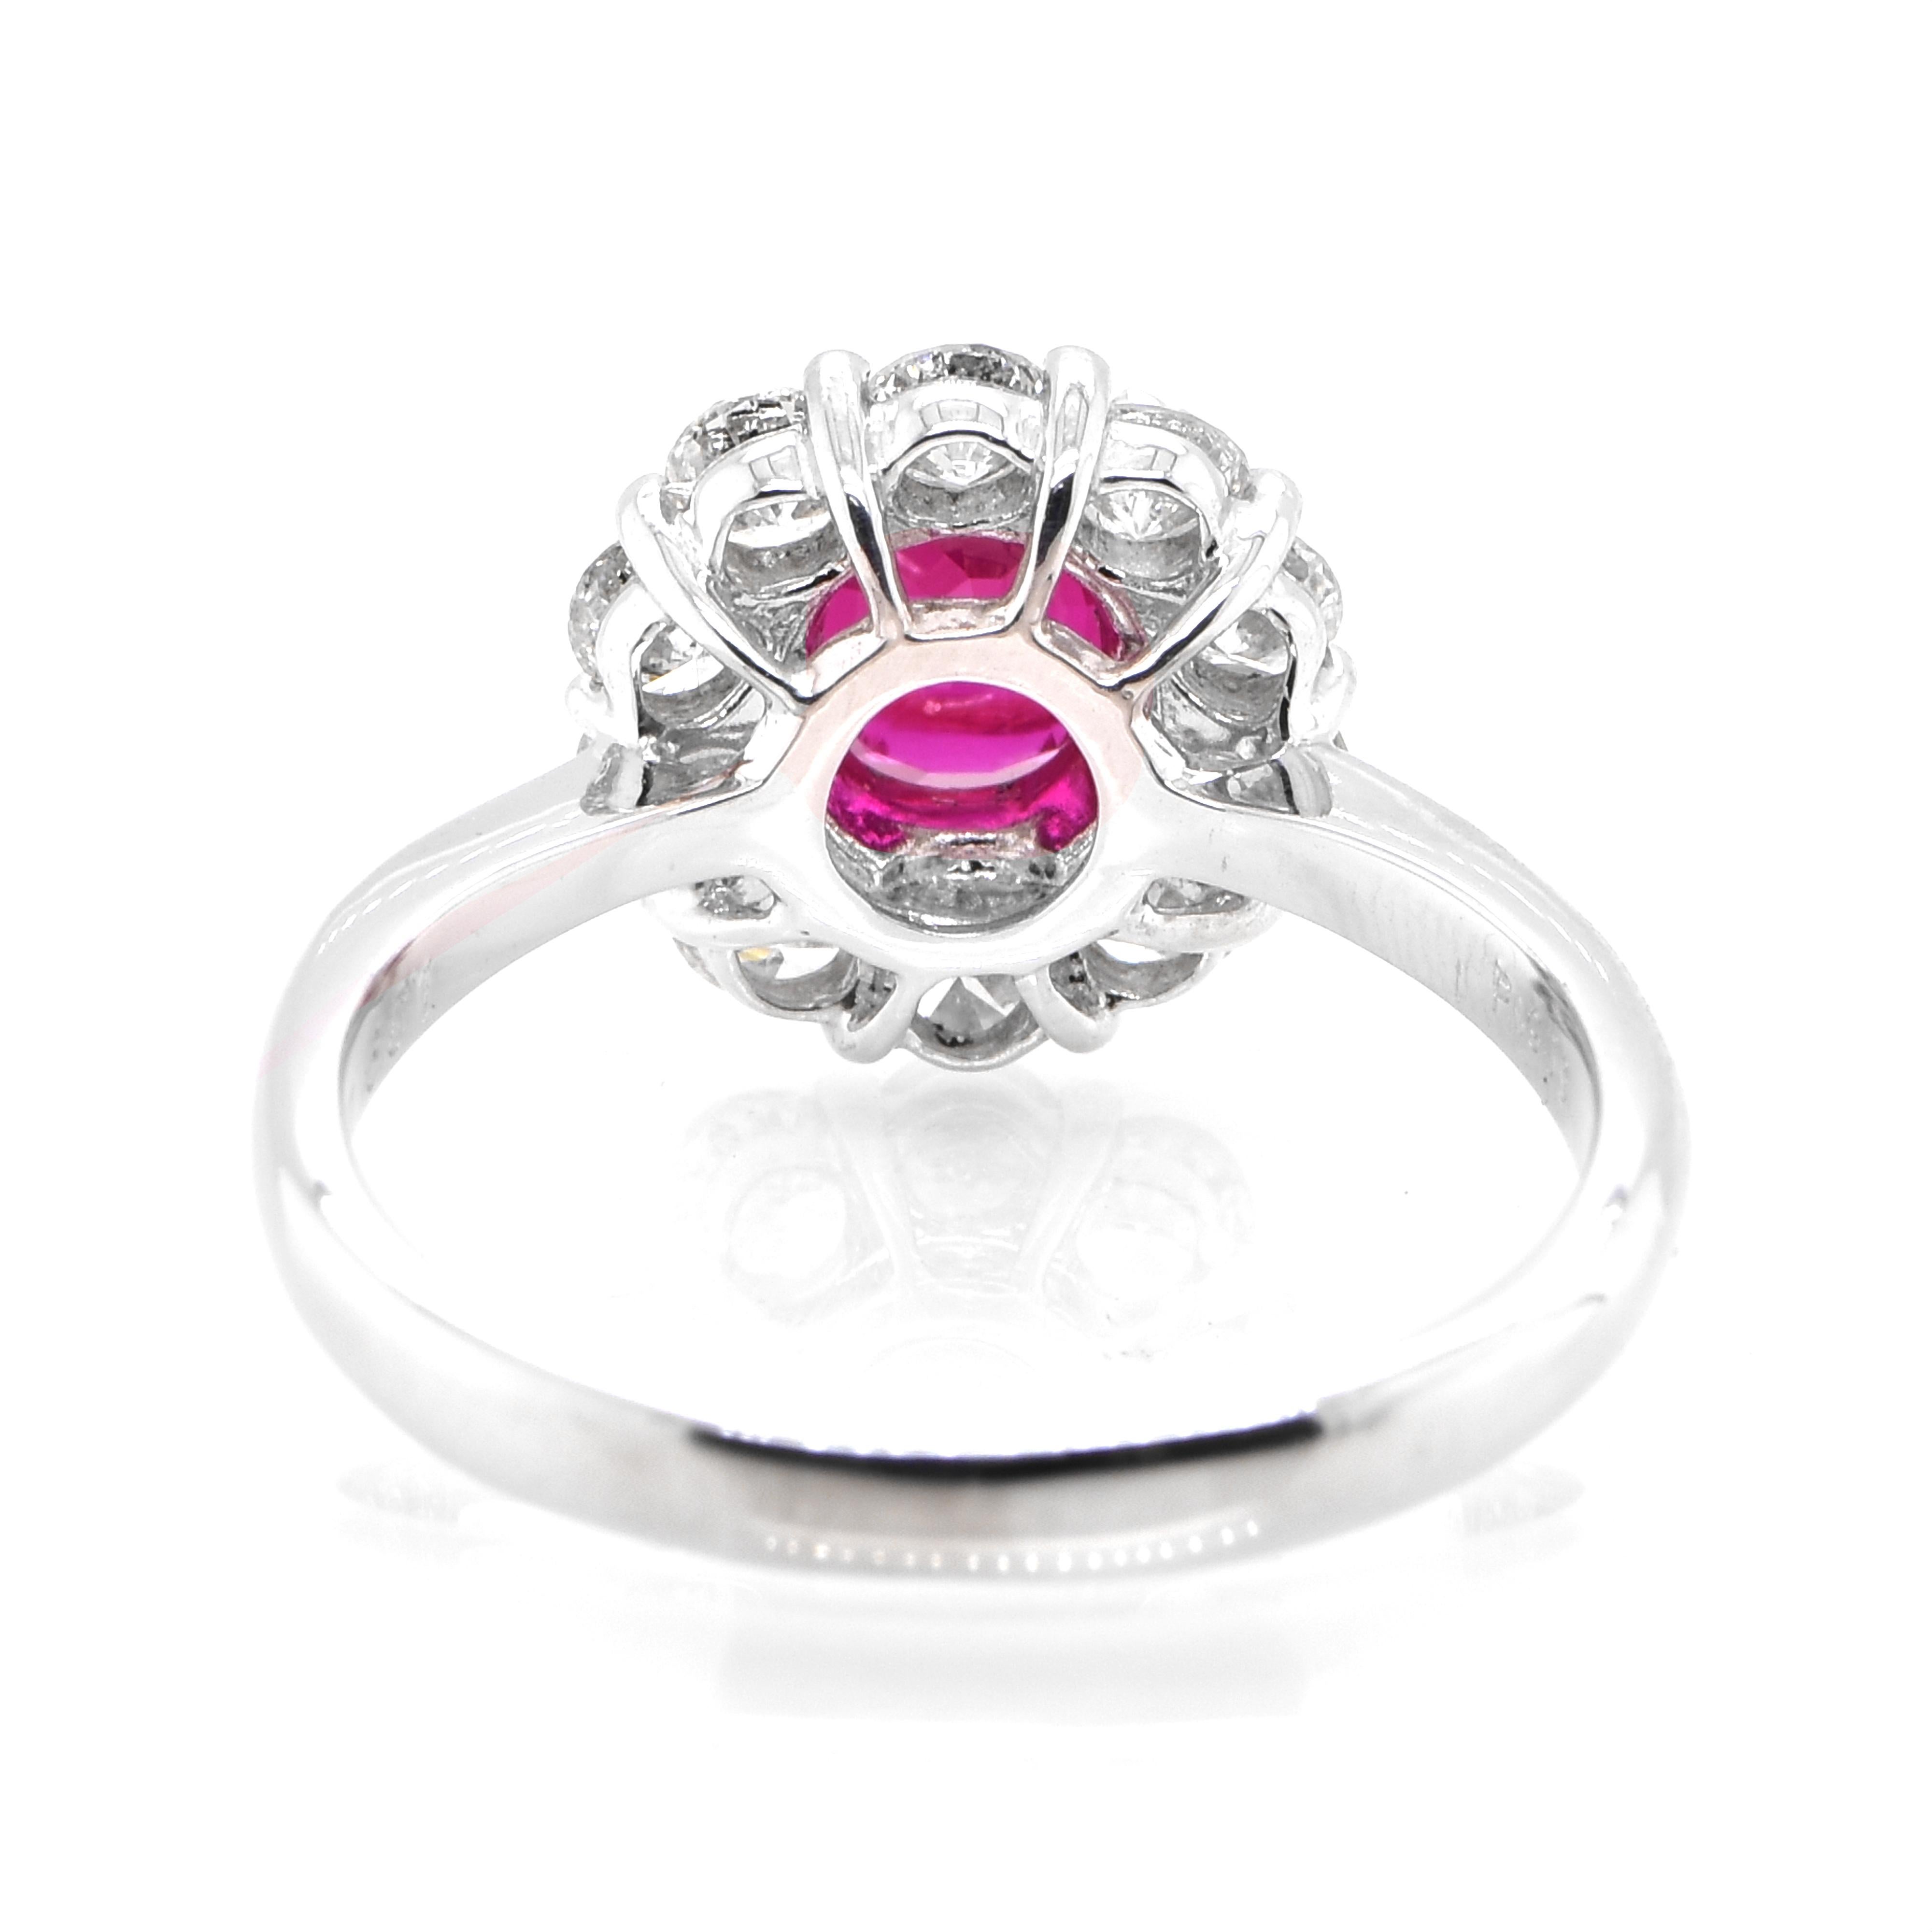 Women's AIGS Certified 1.39 Carat Untreated Ruby and Diamond Ring Made in Platinum For Sale